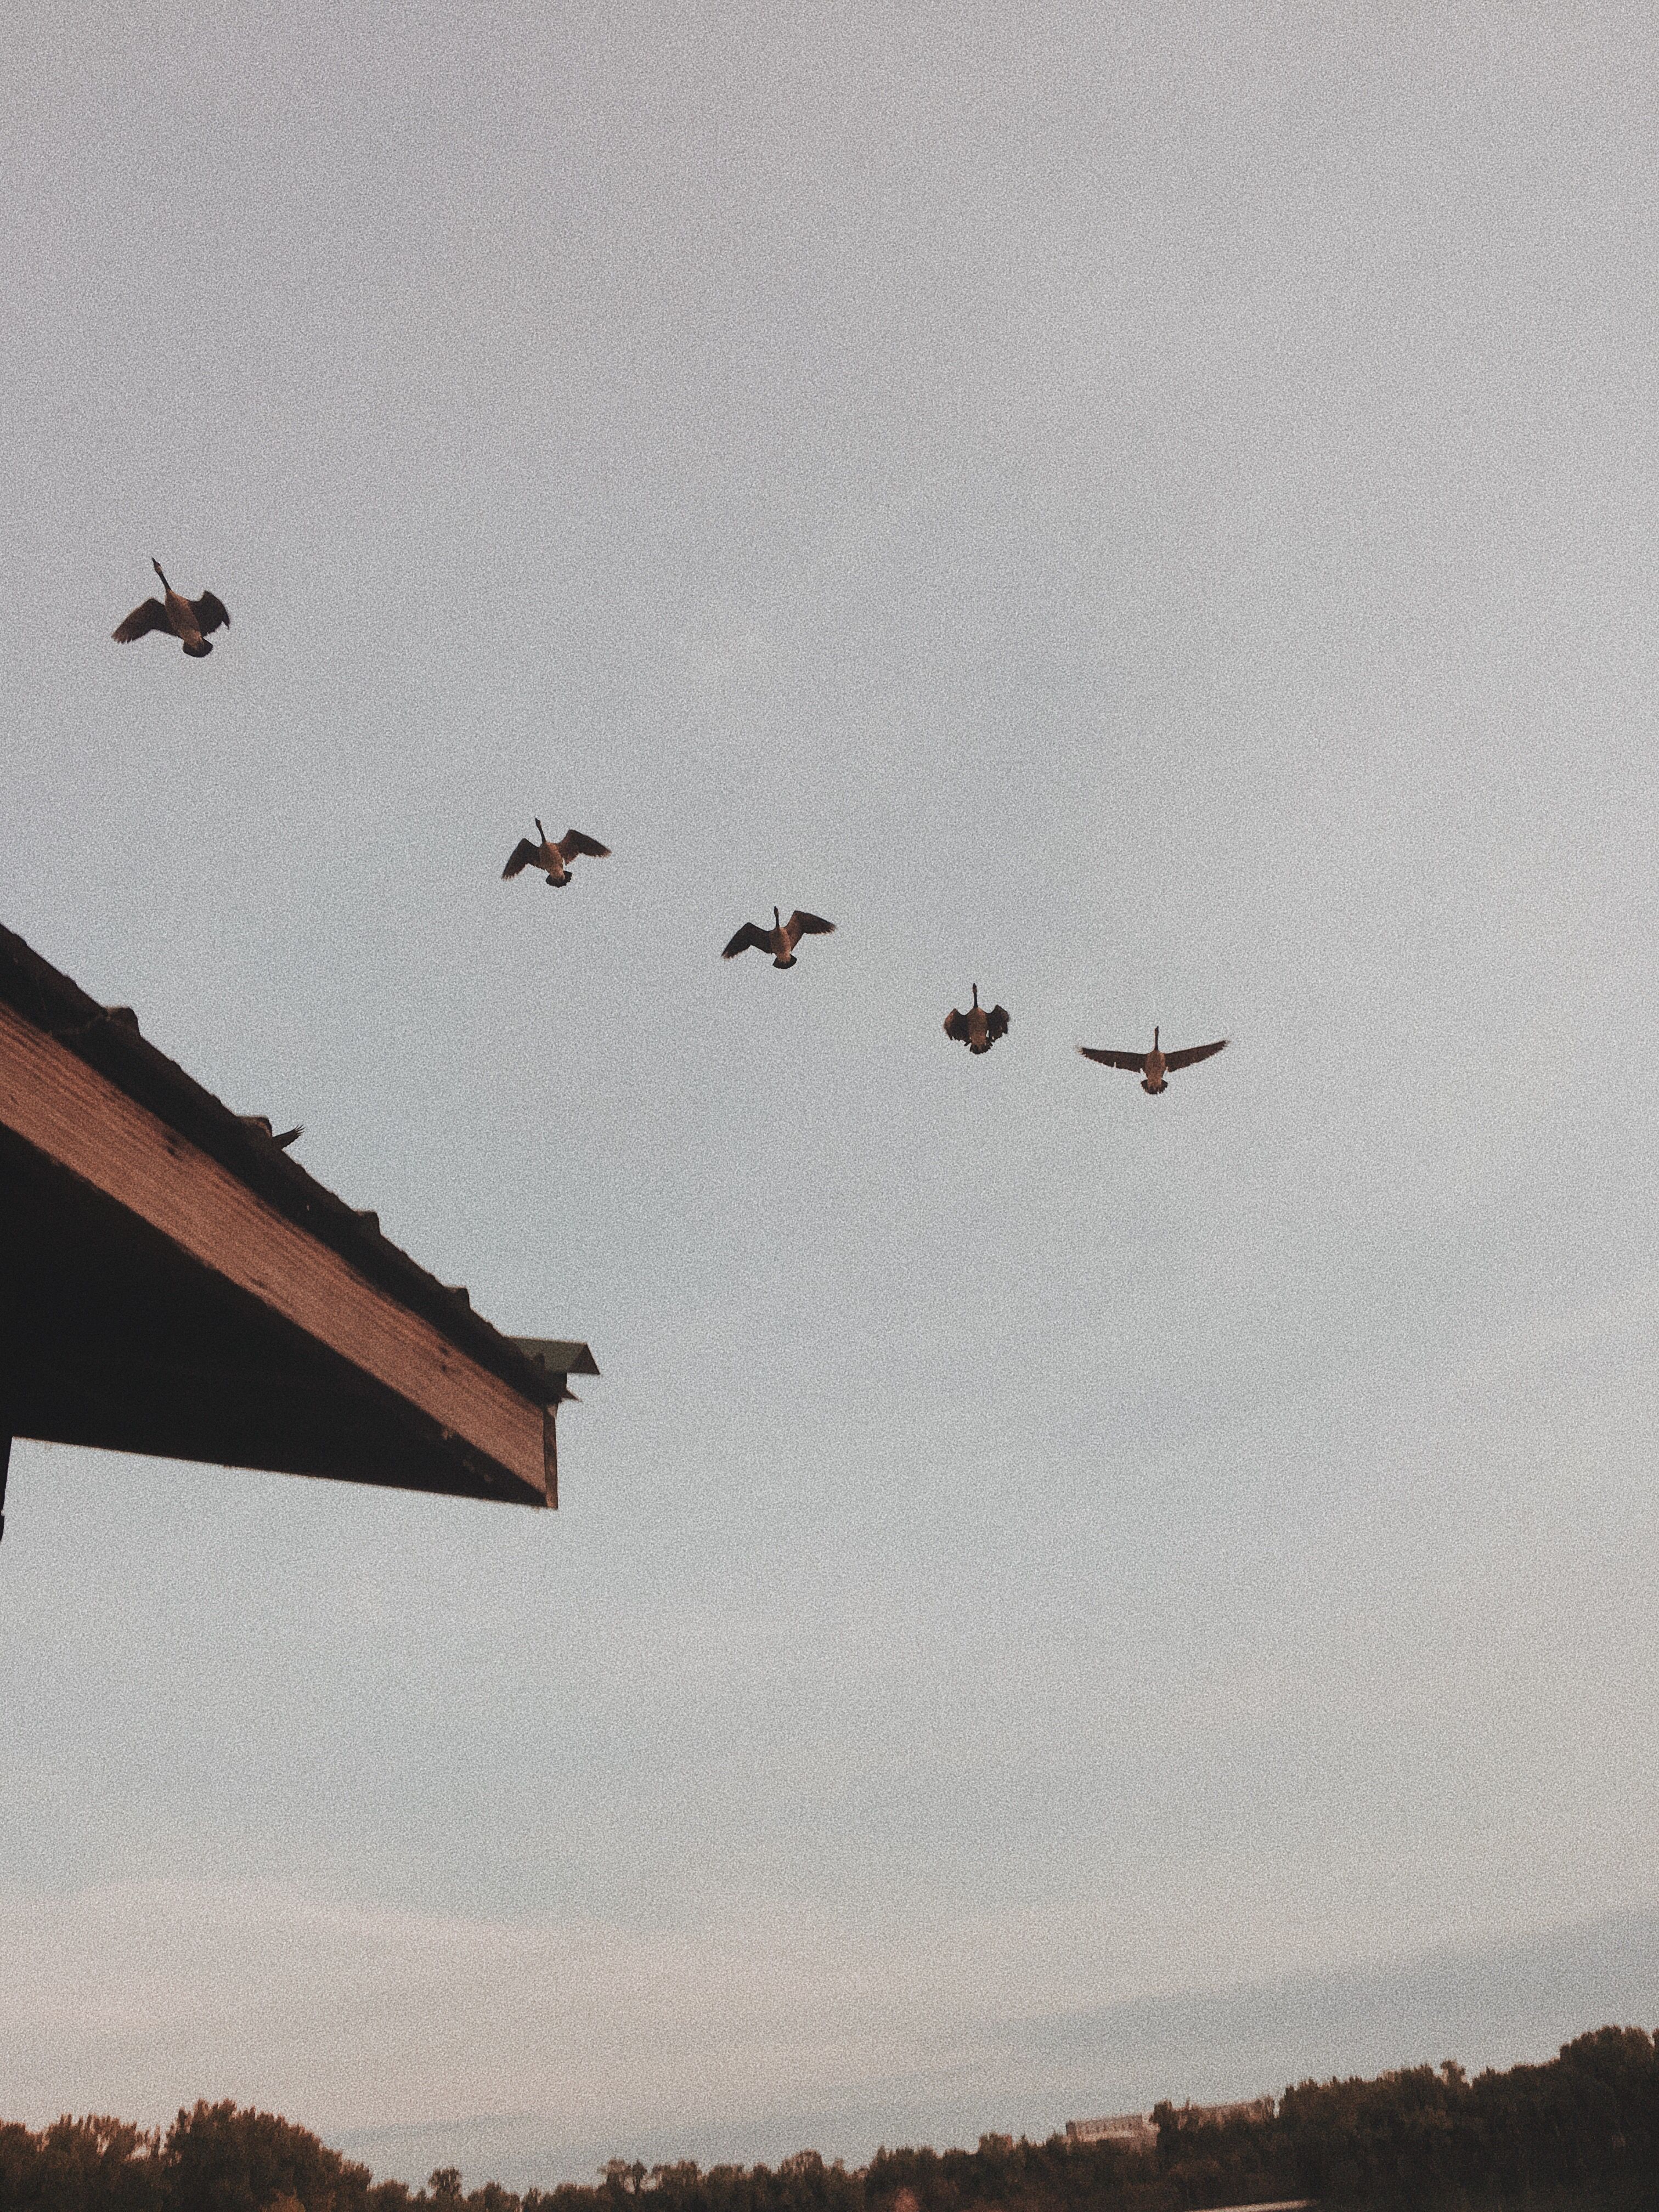 A flock of birds flying over a house. - 